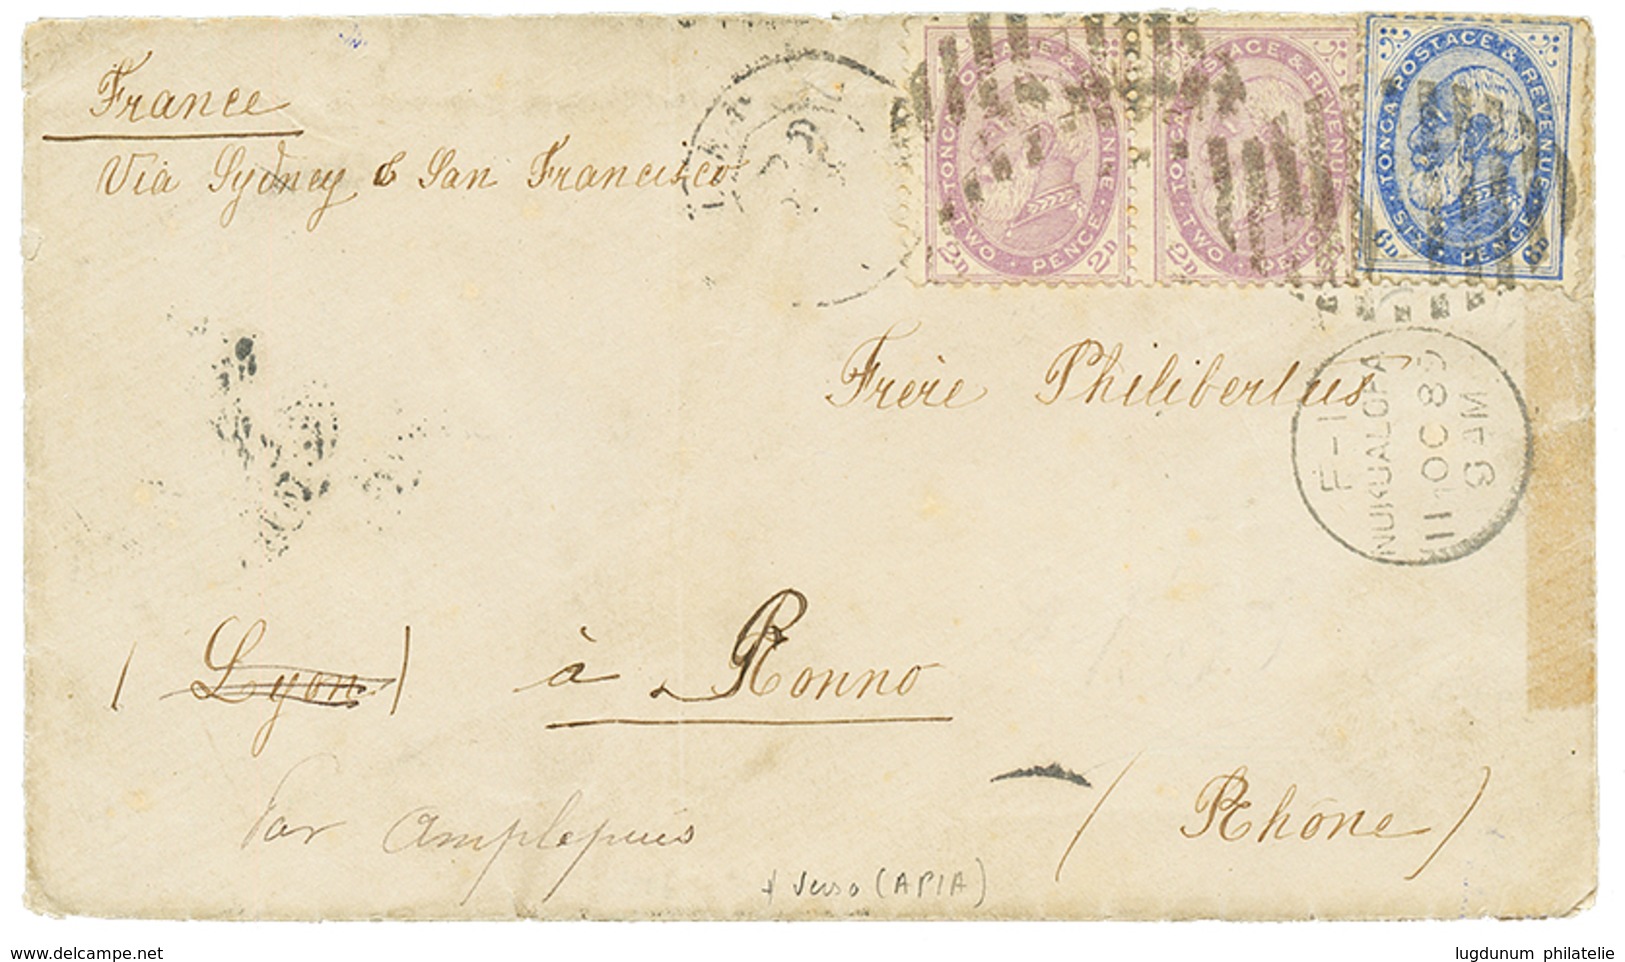 TONGA - FIRST ISSUE : 1889 2d Violet(x2) + 6d Blue + NUIKUALOFA On Envelope To FRANCE. Missionary Mail. Verso, APIA DEUT - Tonga (...-1970)